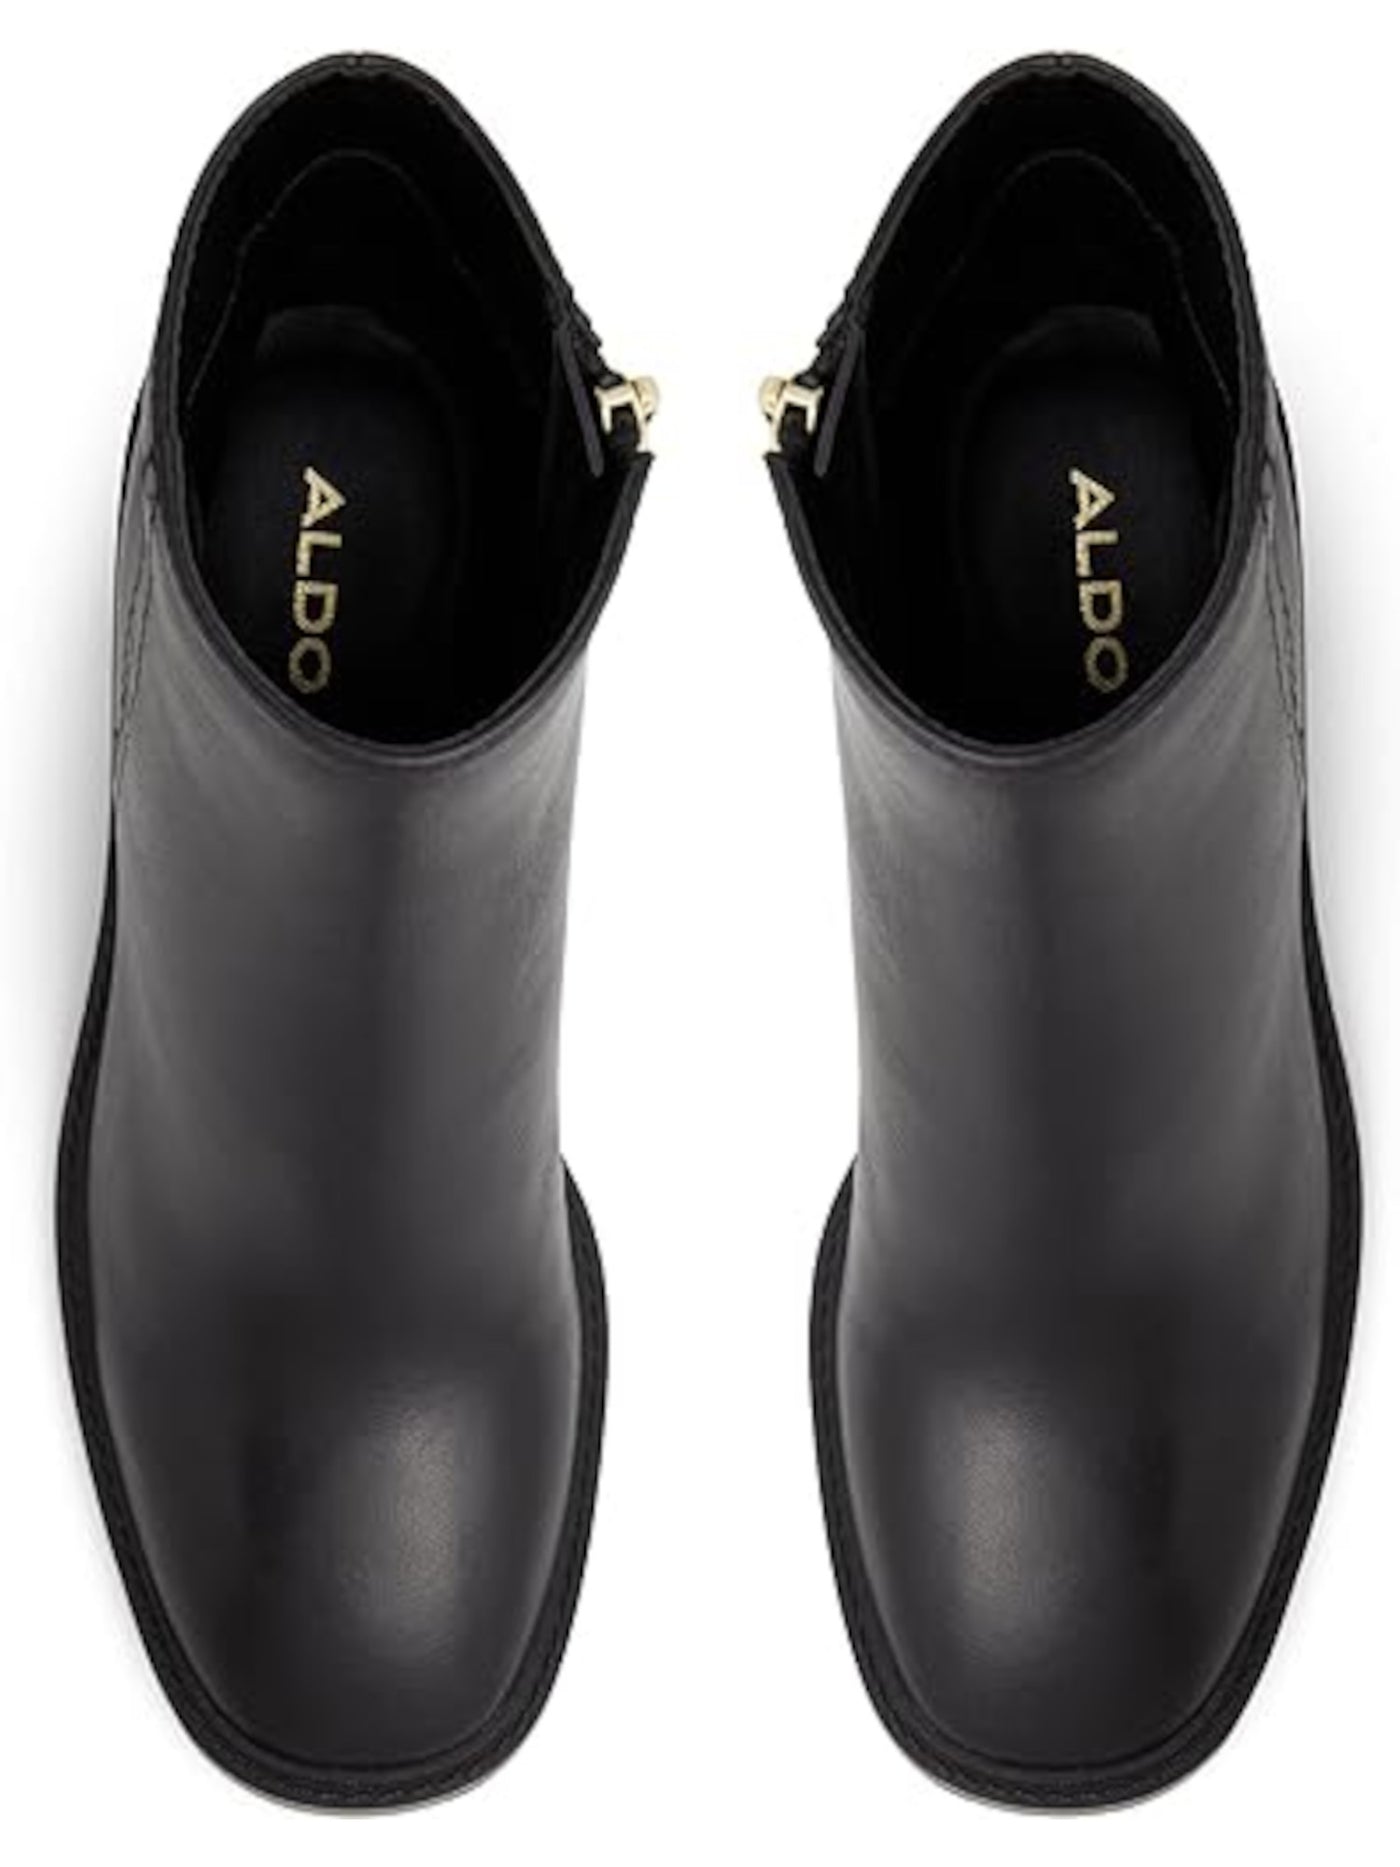 ALDO Womens Black Arch Support Removable Insole Cushioned Filly Round Toe Block Heel Zip-Up Leather Booties 7.5